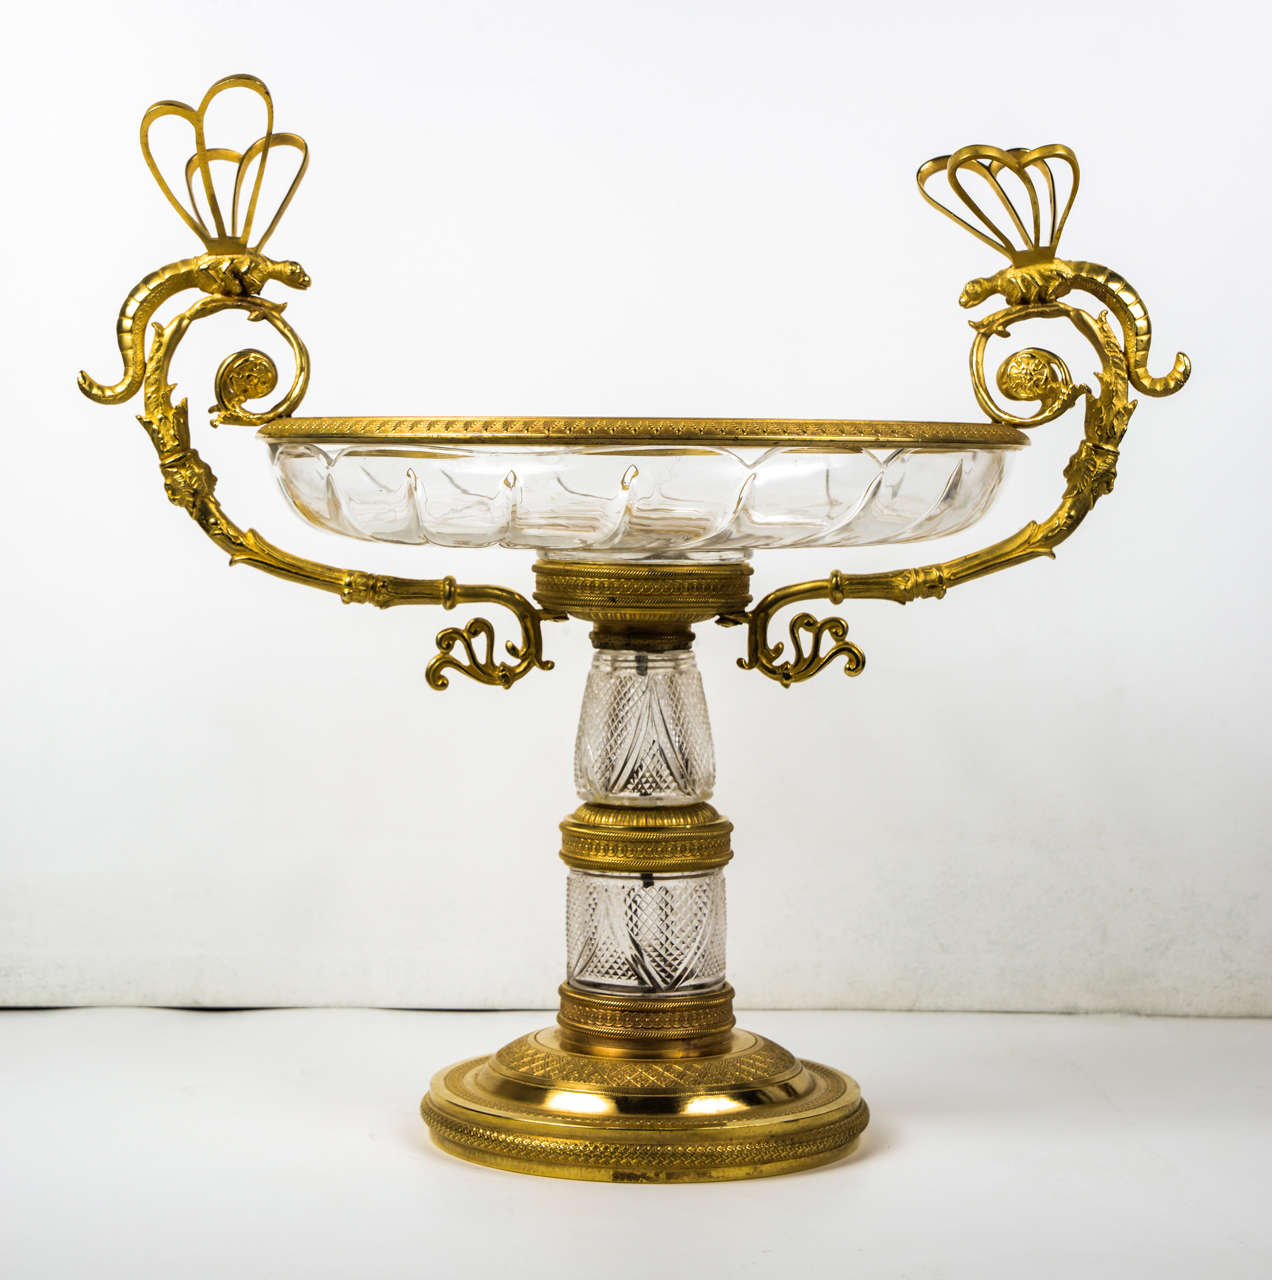 exquisite crystal and gilded bronze center of table.
Handles  are surmounted by two dragonflies.